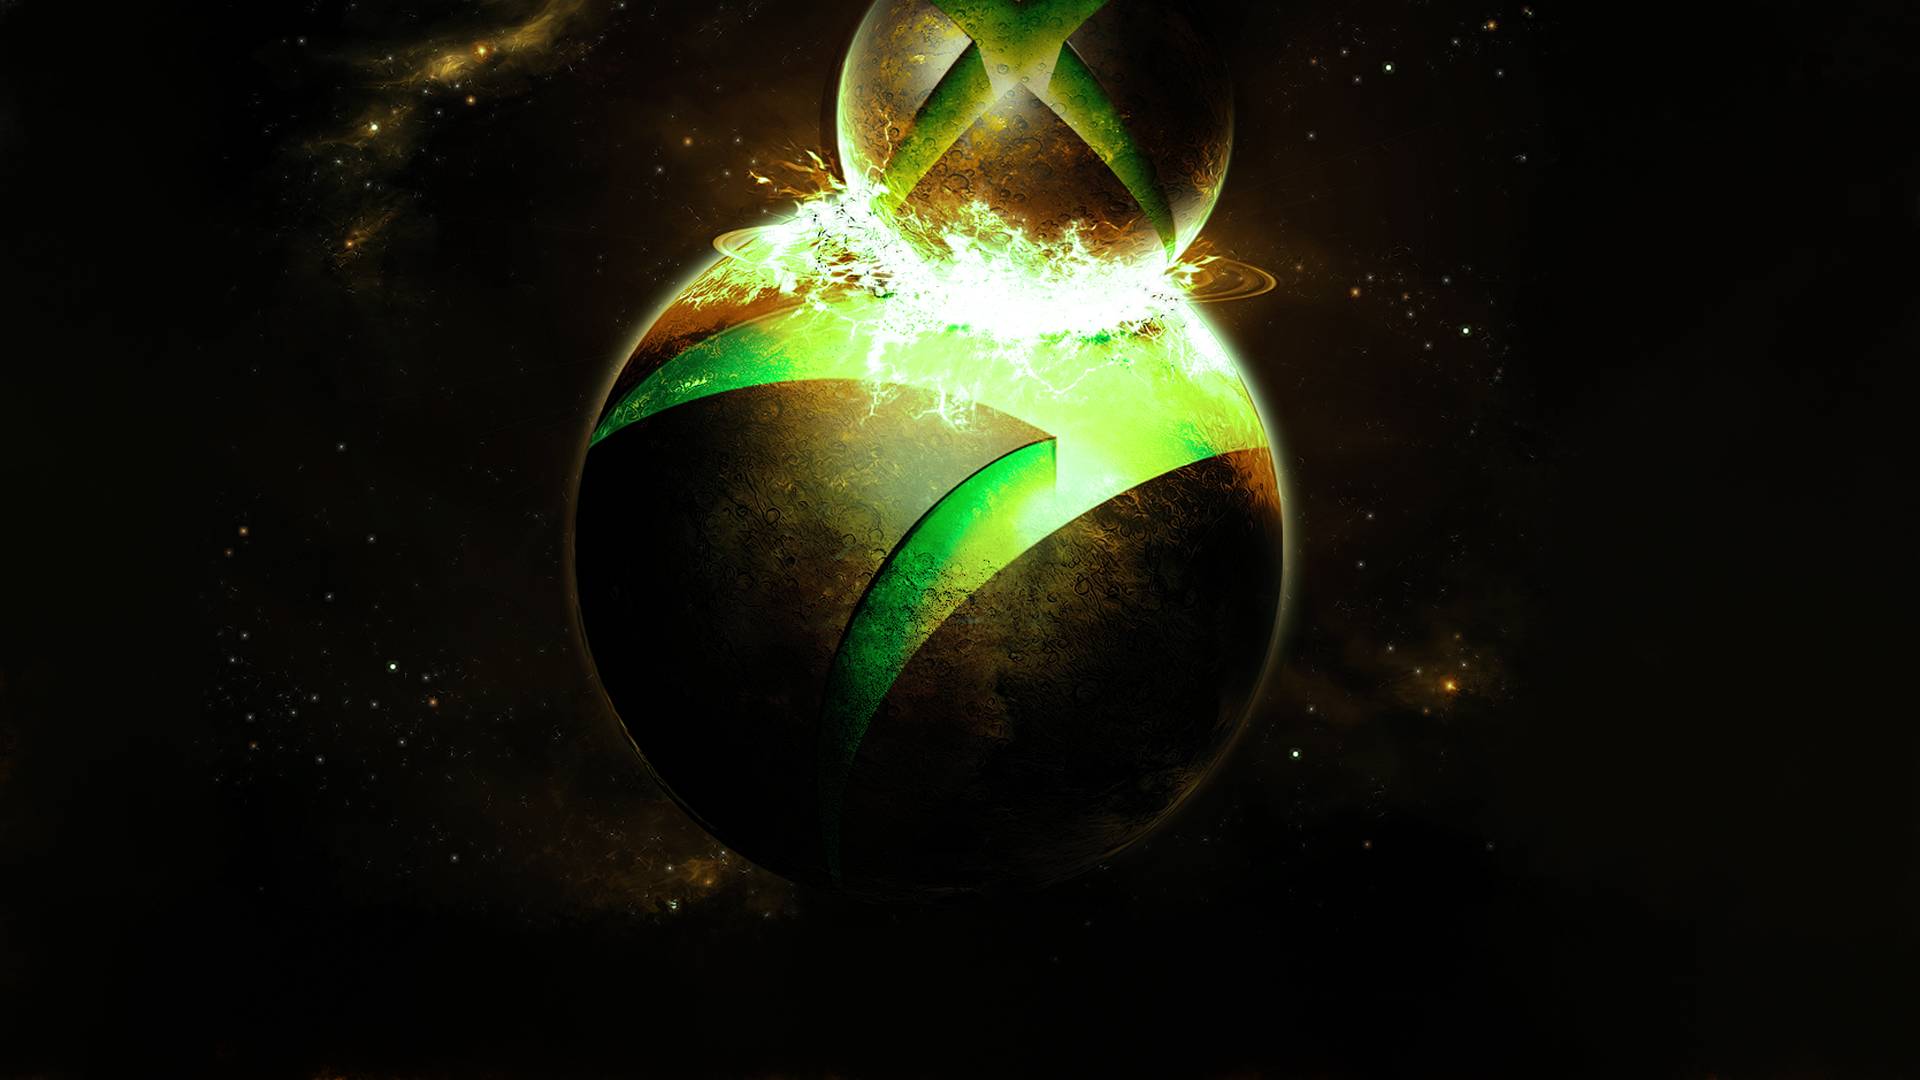 The Image of Outer Space Xbox Live Wallpaper